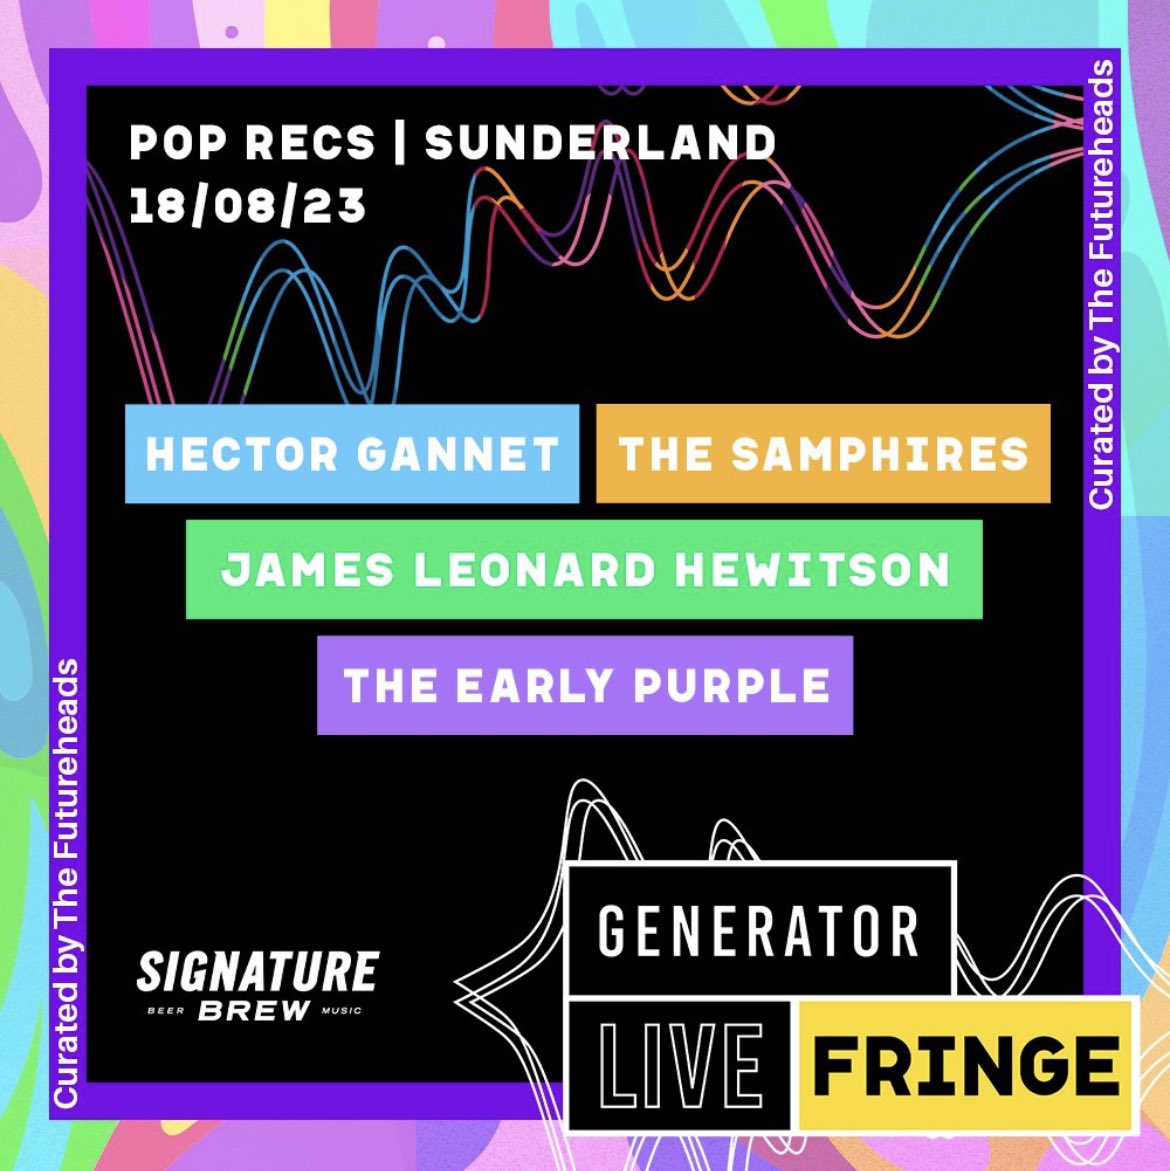 We’ve put a great lineup of 4 mega NE bands together for a @GeneratorLiveNE show at @poprecsltd on August 18th including @HectorGannet, @thesamphires, @jameslhewitson and @theearlypurple. Tickets available here: generatorlive.org.uk